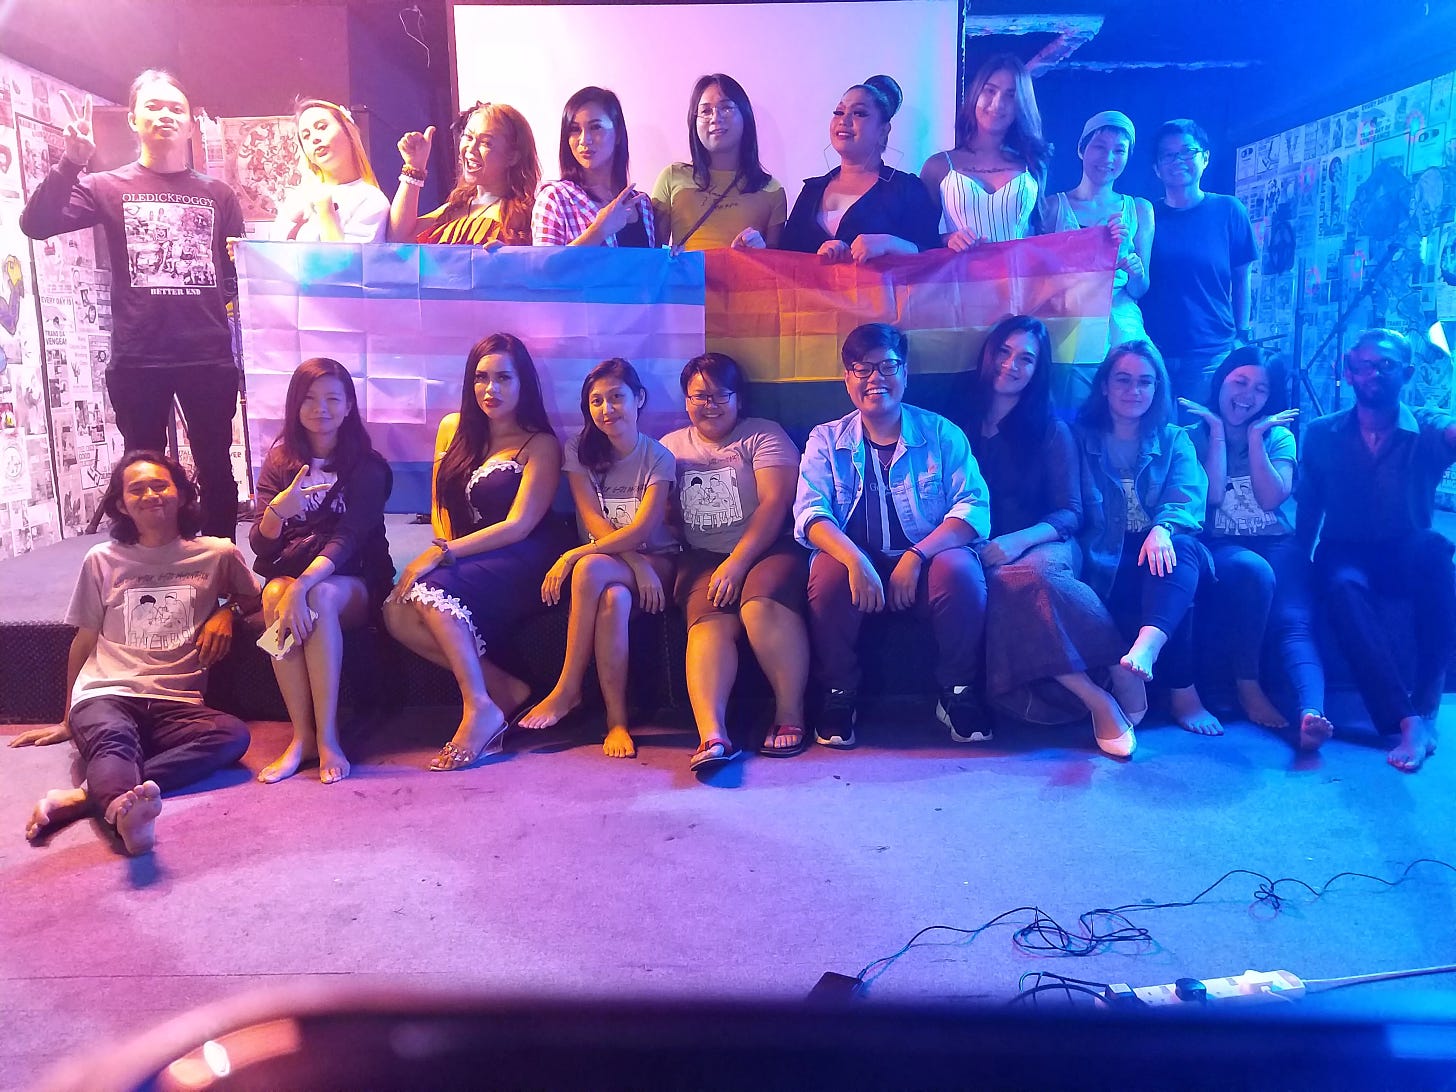 Group photo on a stage with pink and blue lighting. Folks on the back row are holding the trans and rainbow flags.